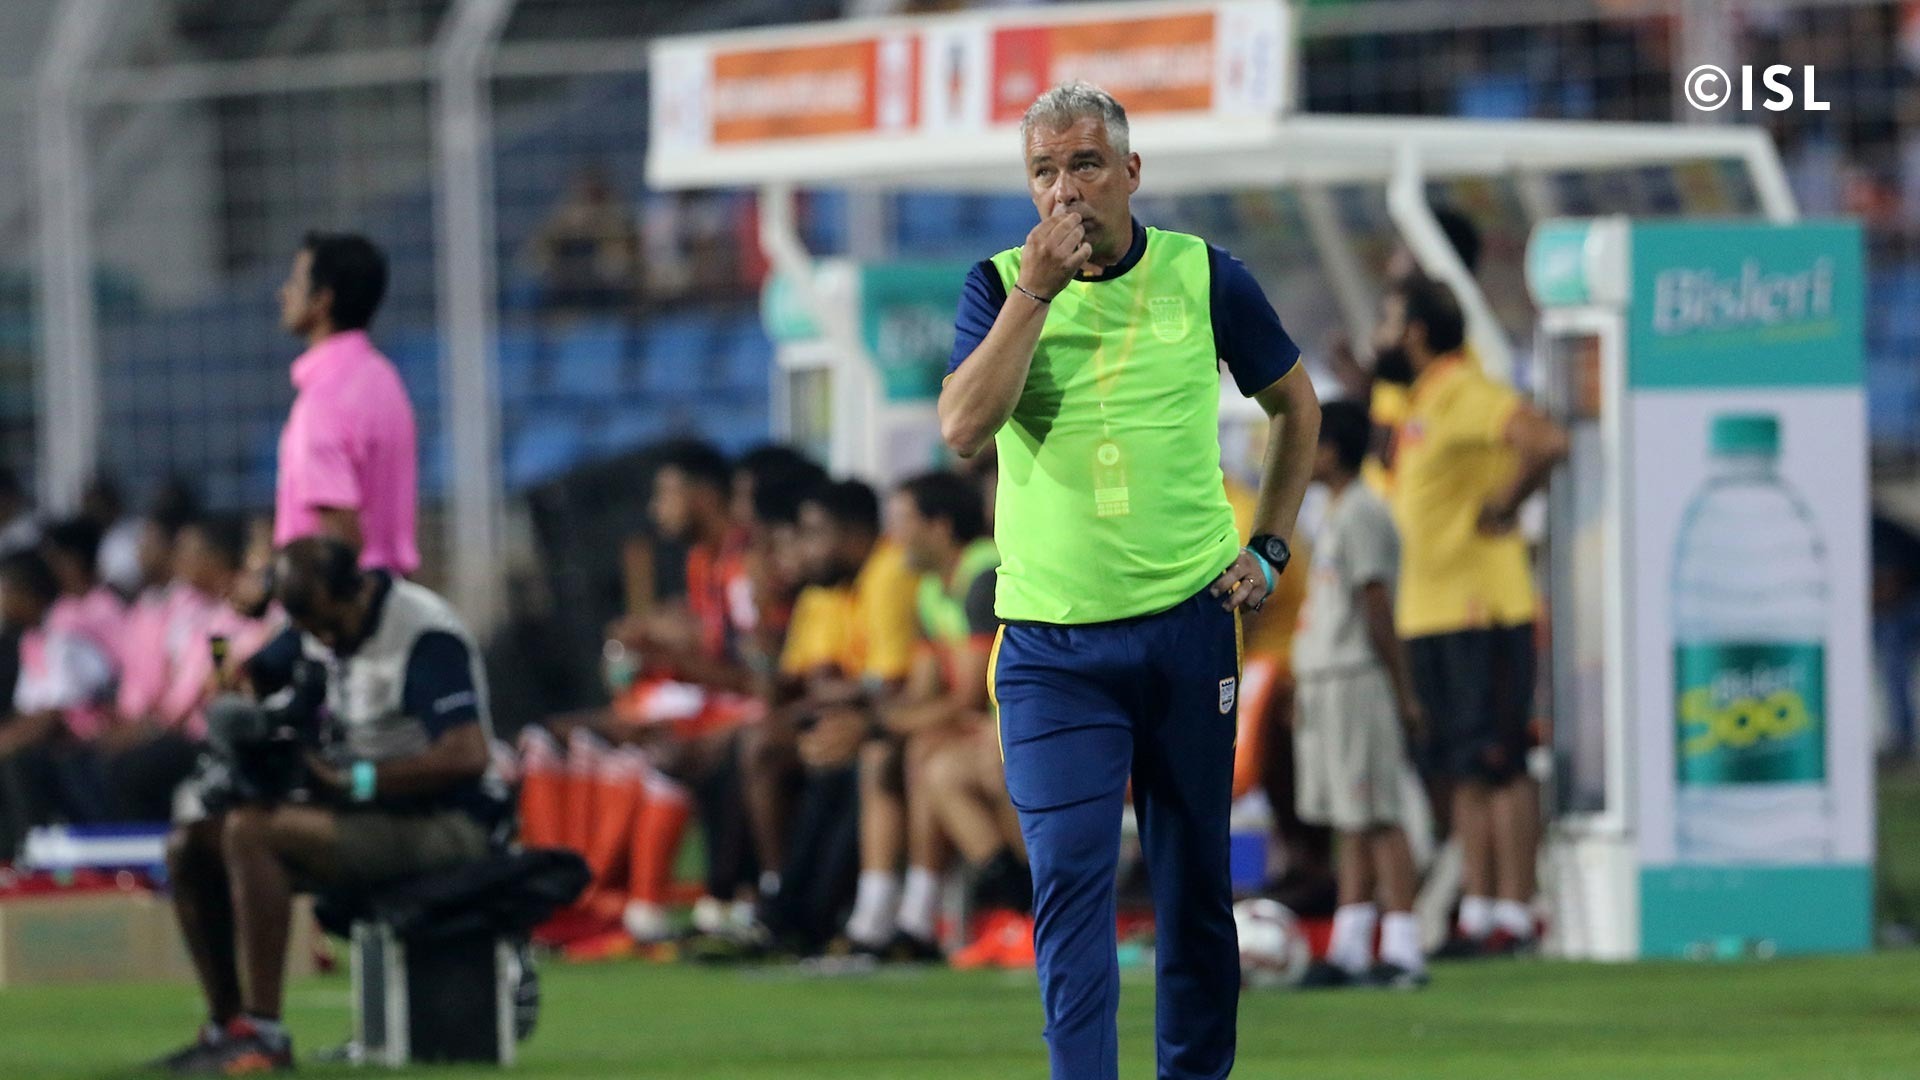 ISL 2019-20 | Pressure to win is on both sides, says Jorge Costa